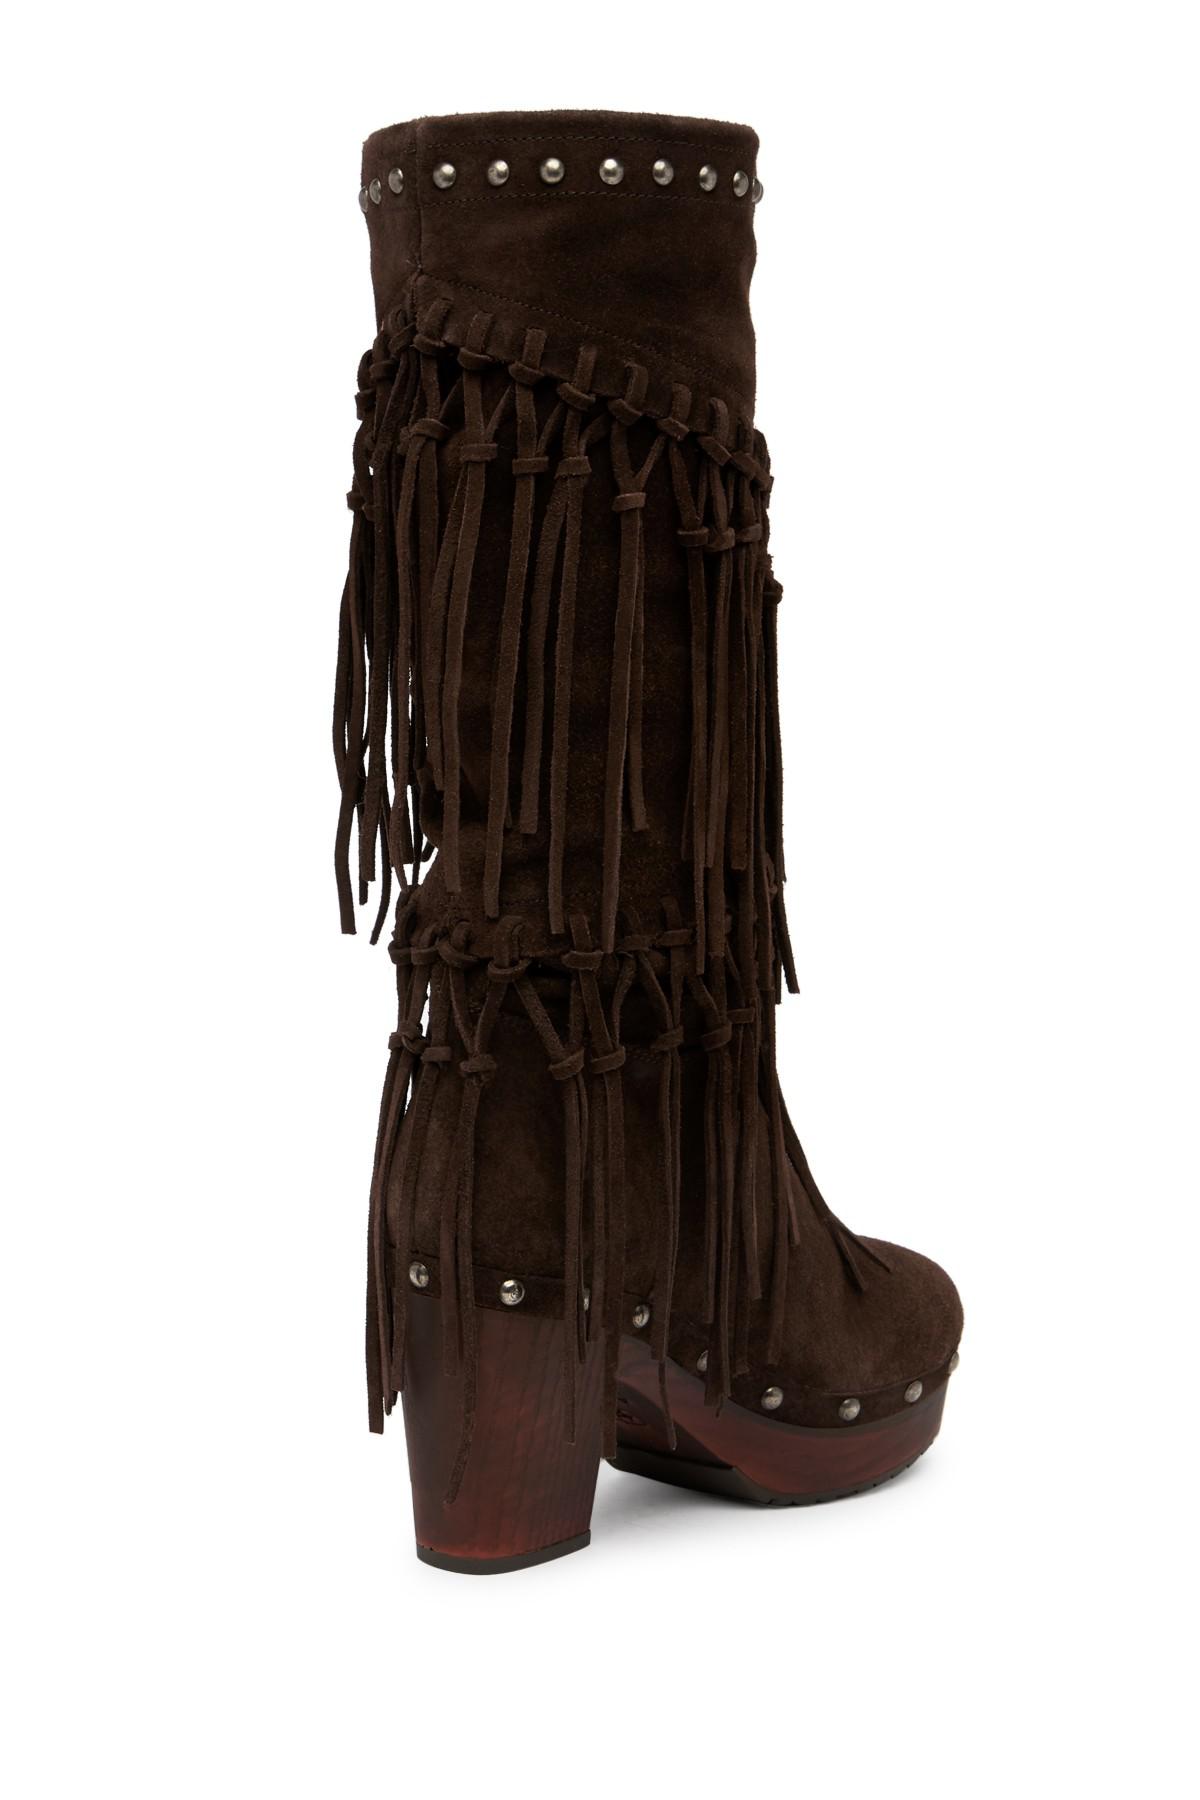 ariat boots with fringe